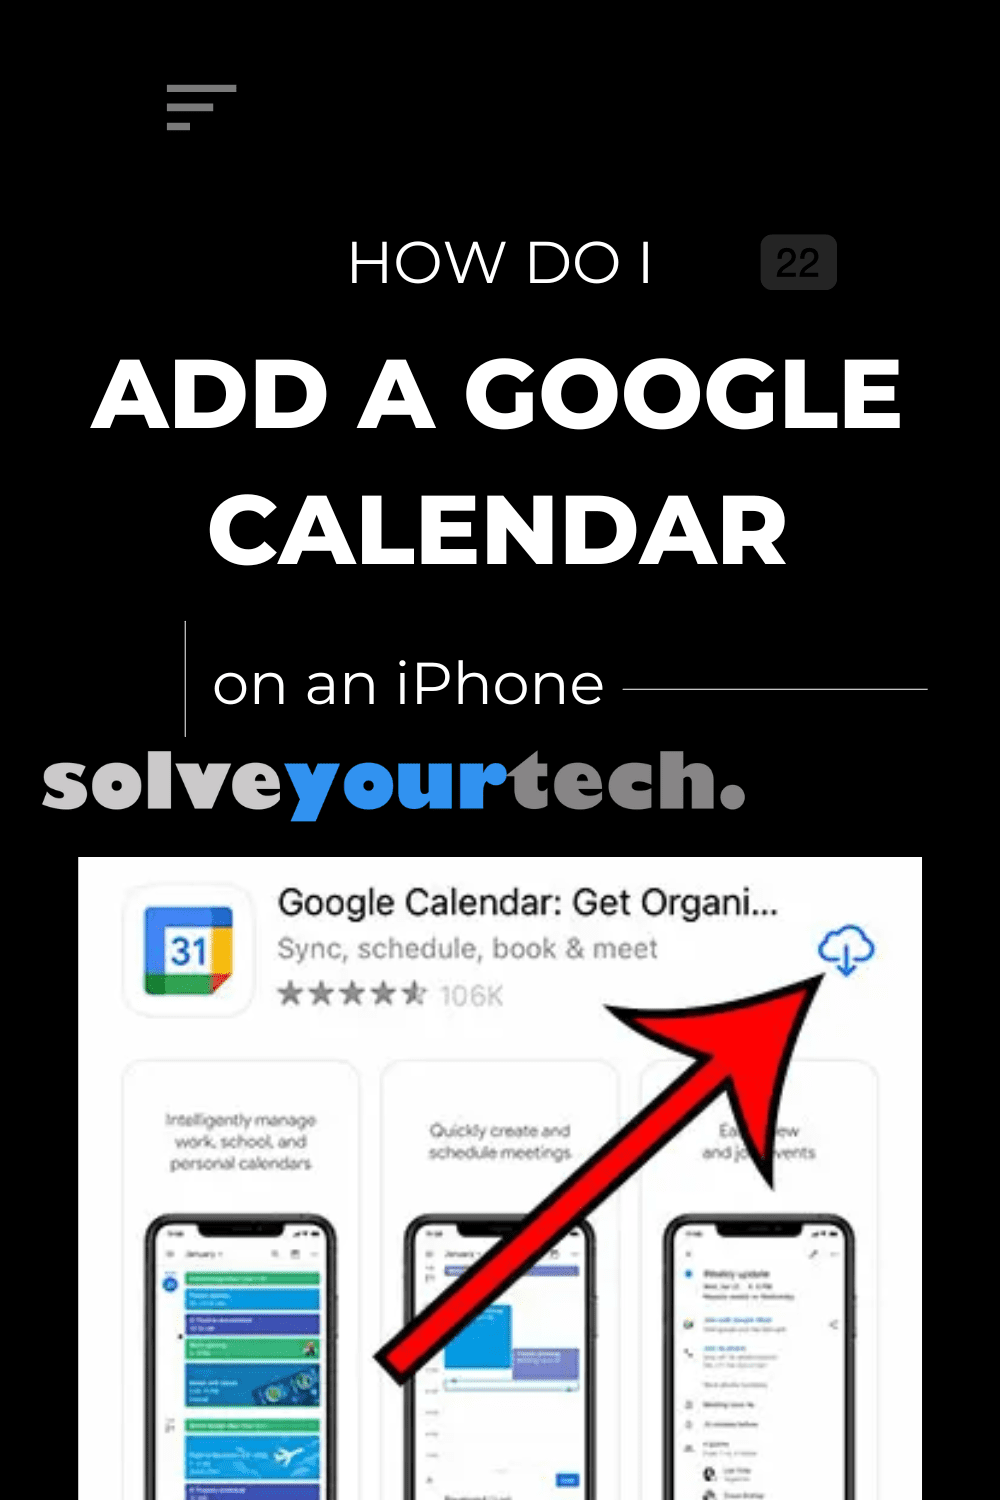 How Do I Add a Google Calendar to My iPhone? Solve Your Tech